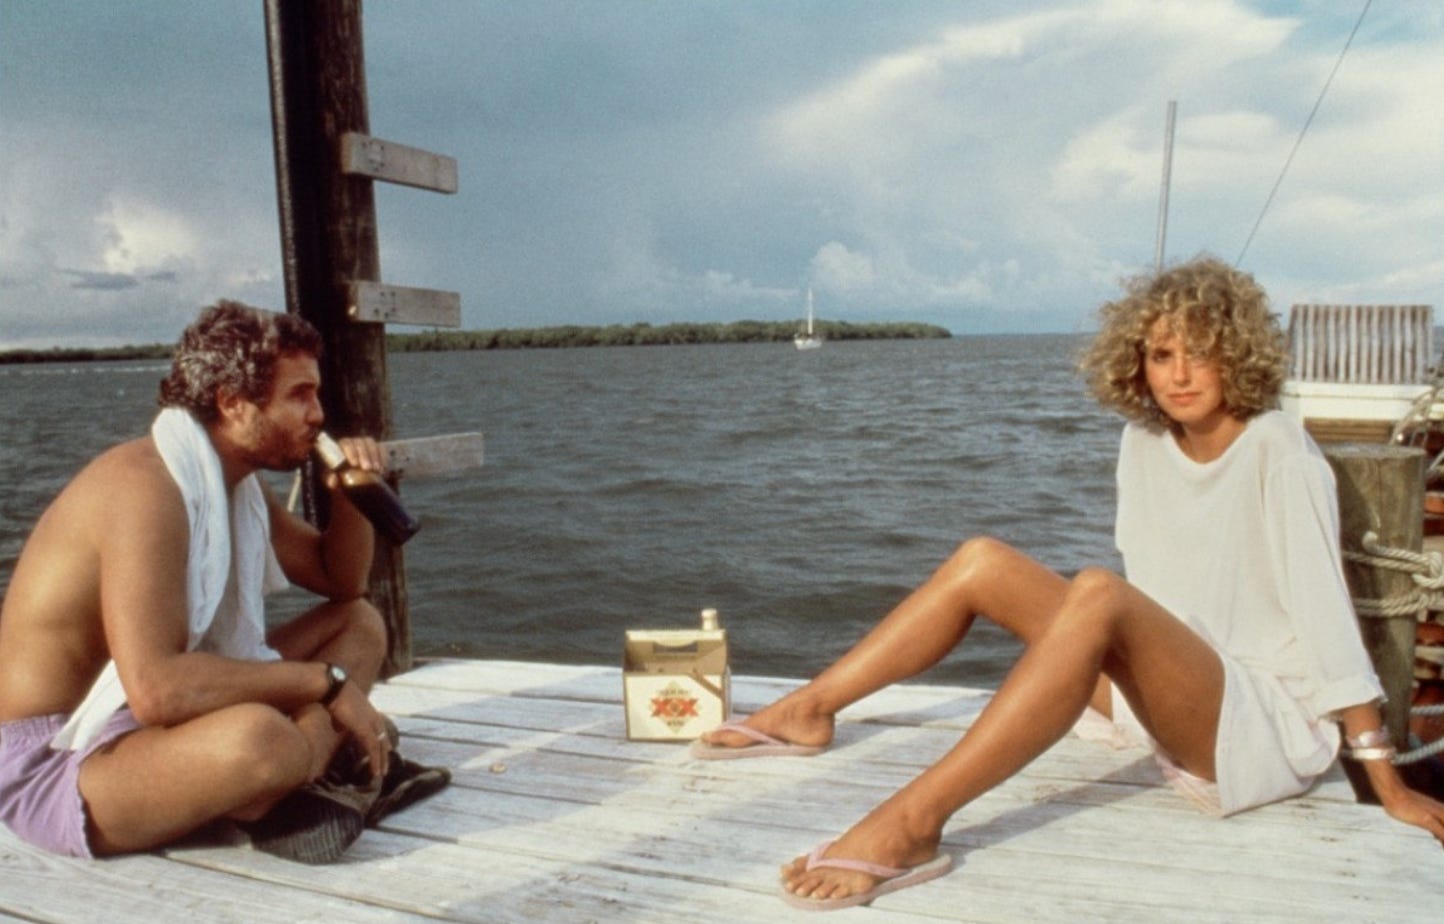 Screengrab of Will and Kim from Manhunter (1986). They're sitting on a dock on Marathon, Florida. Will is drinking a beer. Kim is looking at the camera.